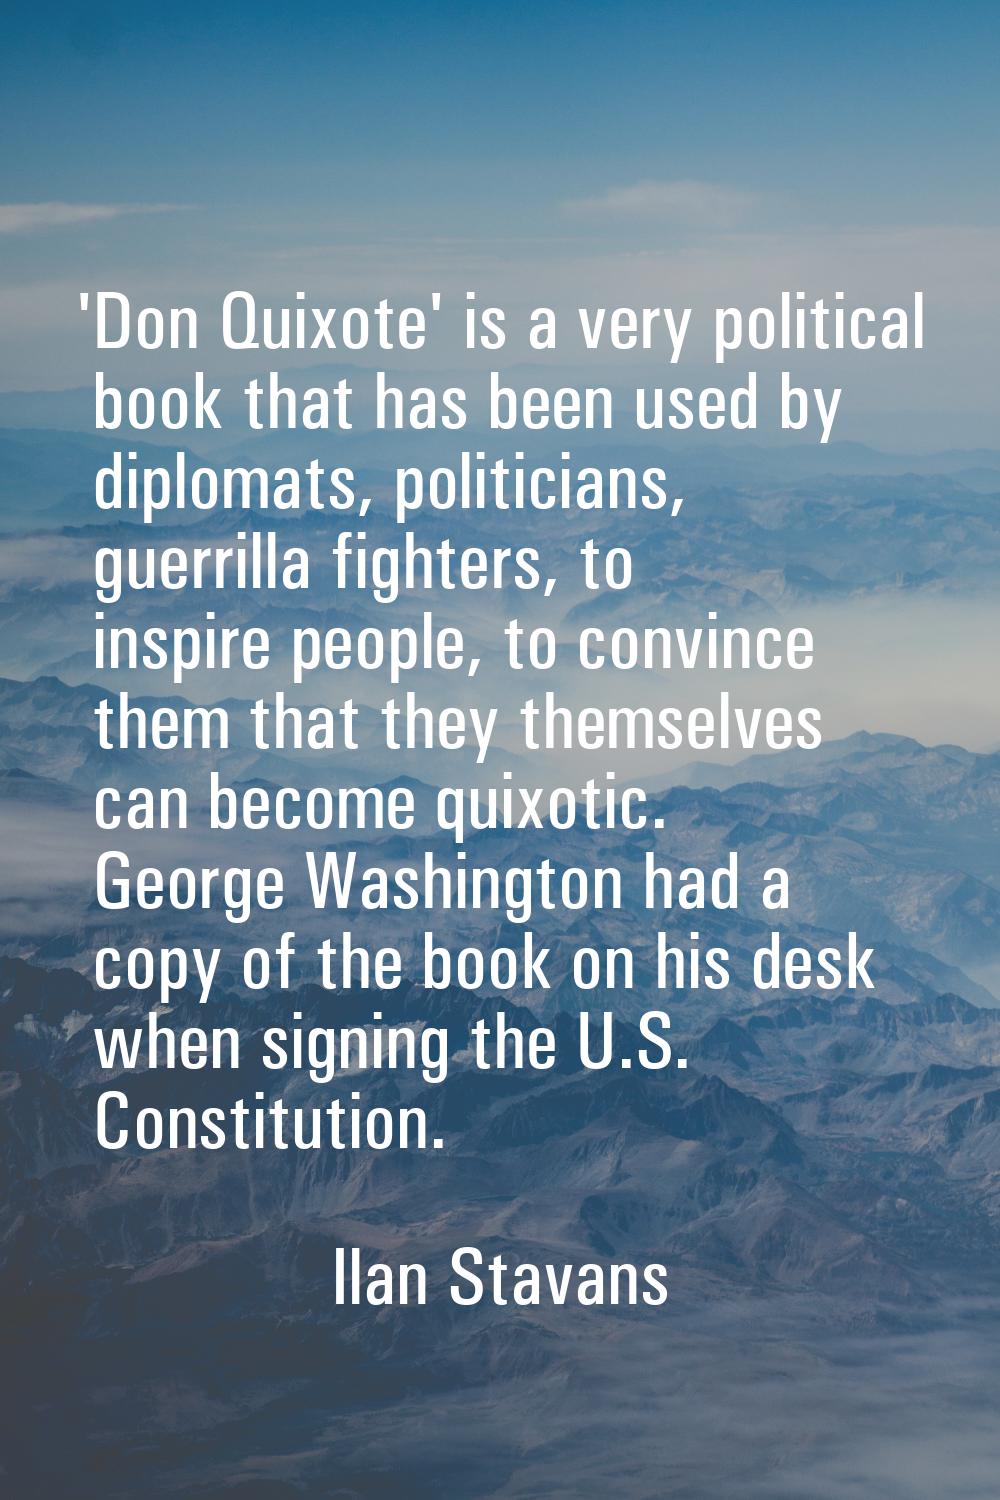 'Don Quixote' is a very political book that has been used by diplomats, politicians, guerrilla figh